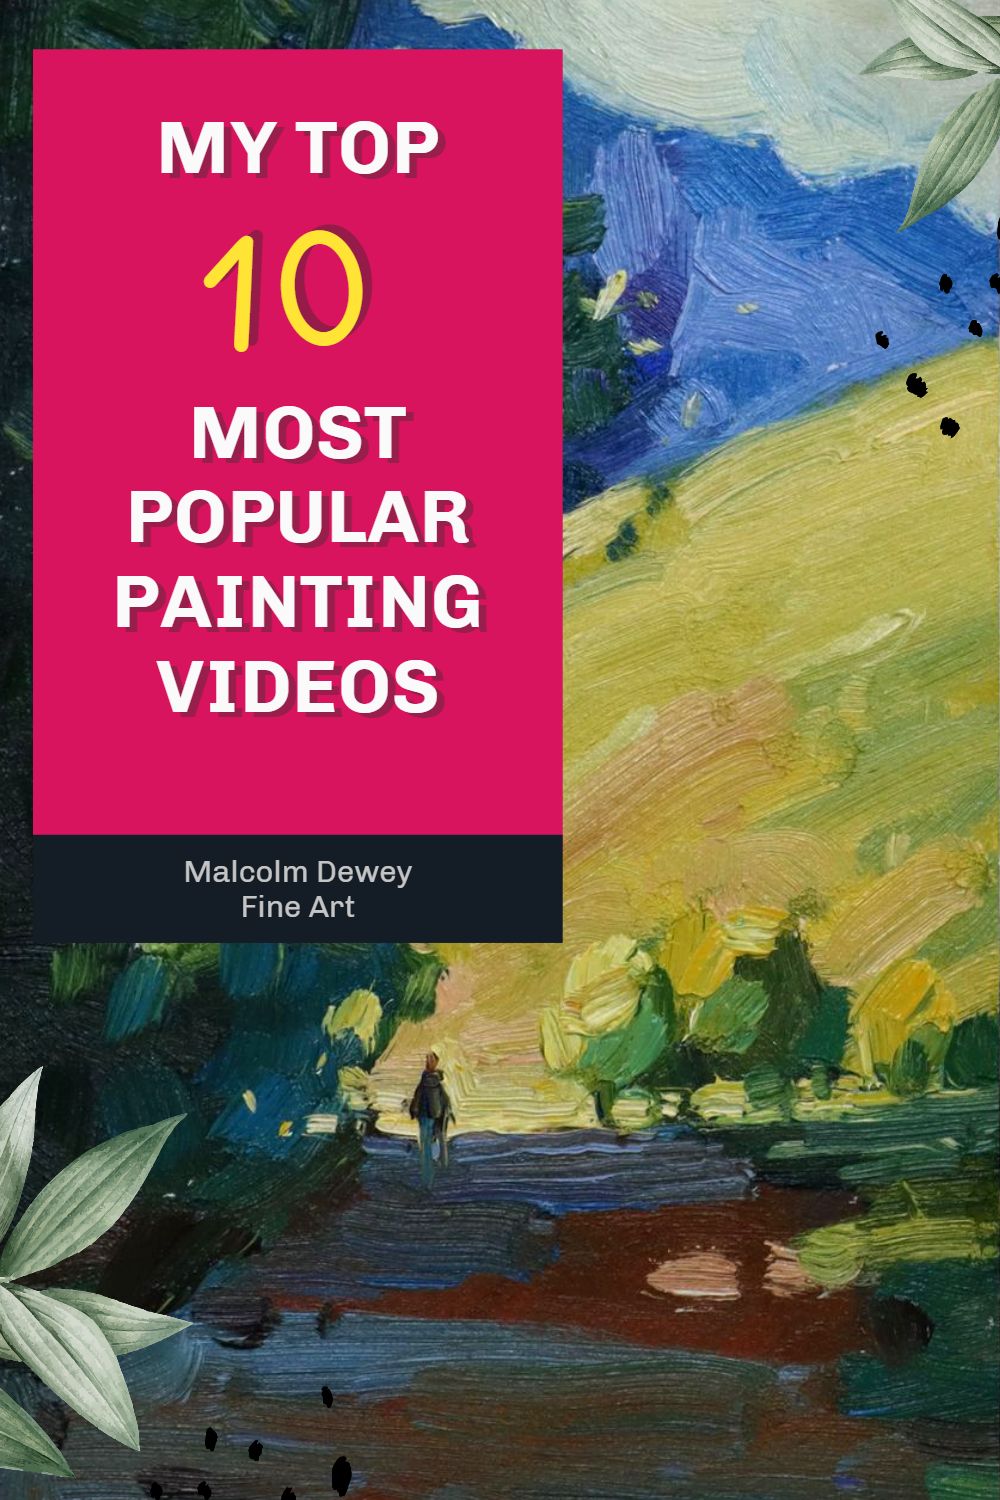 Top 10 Painting Videos on YouTube